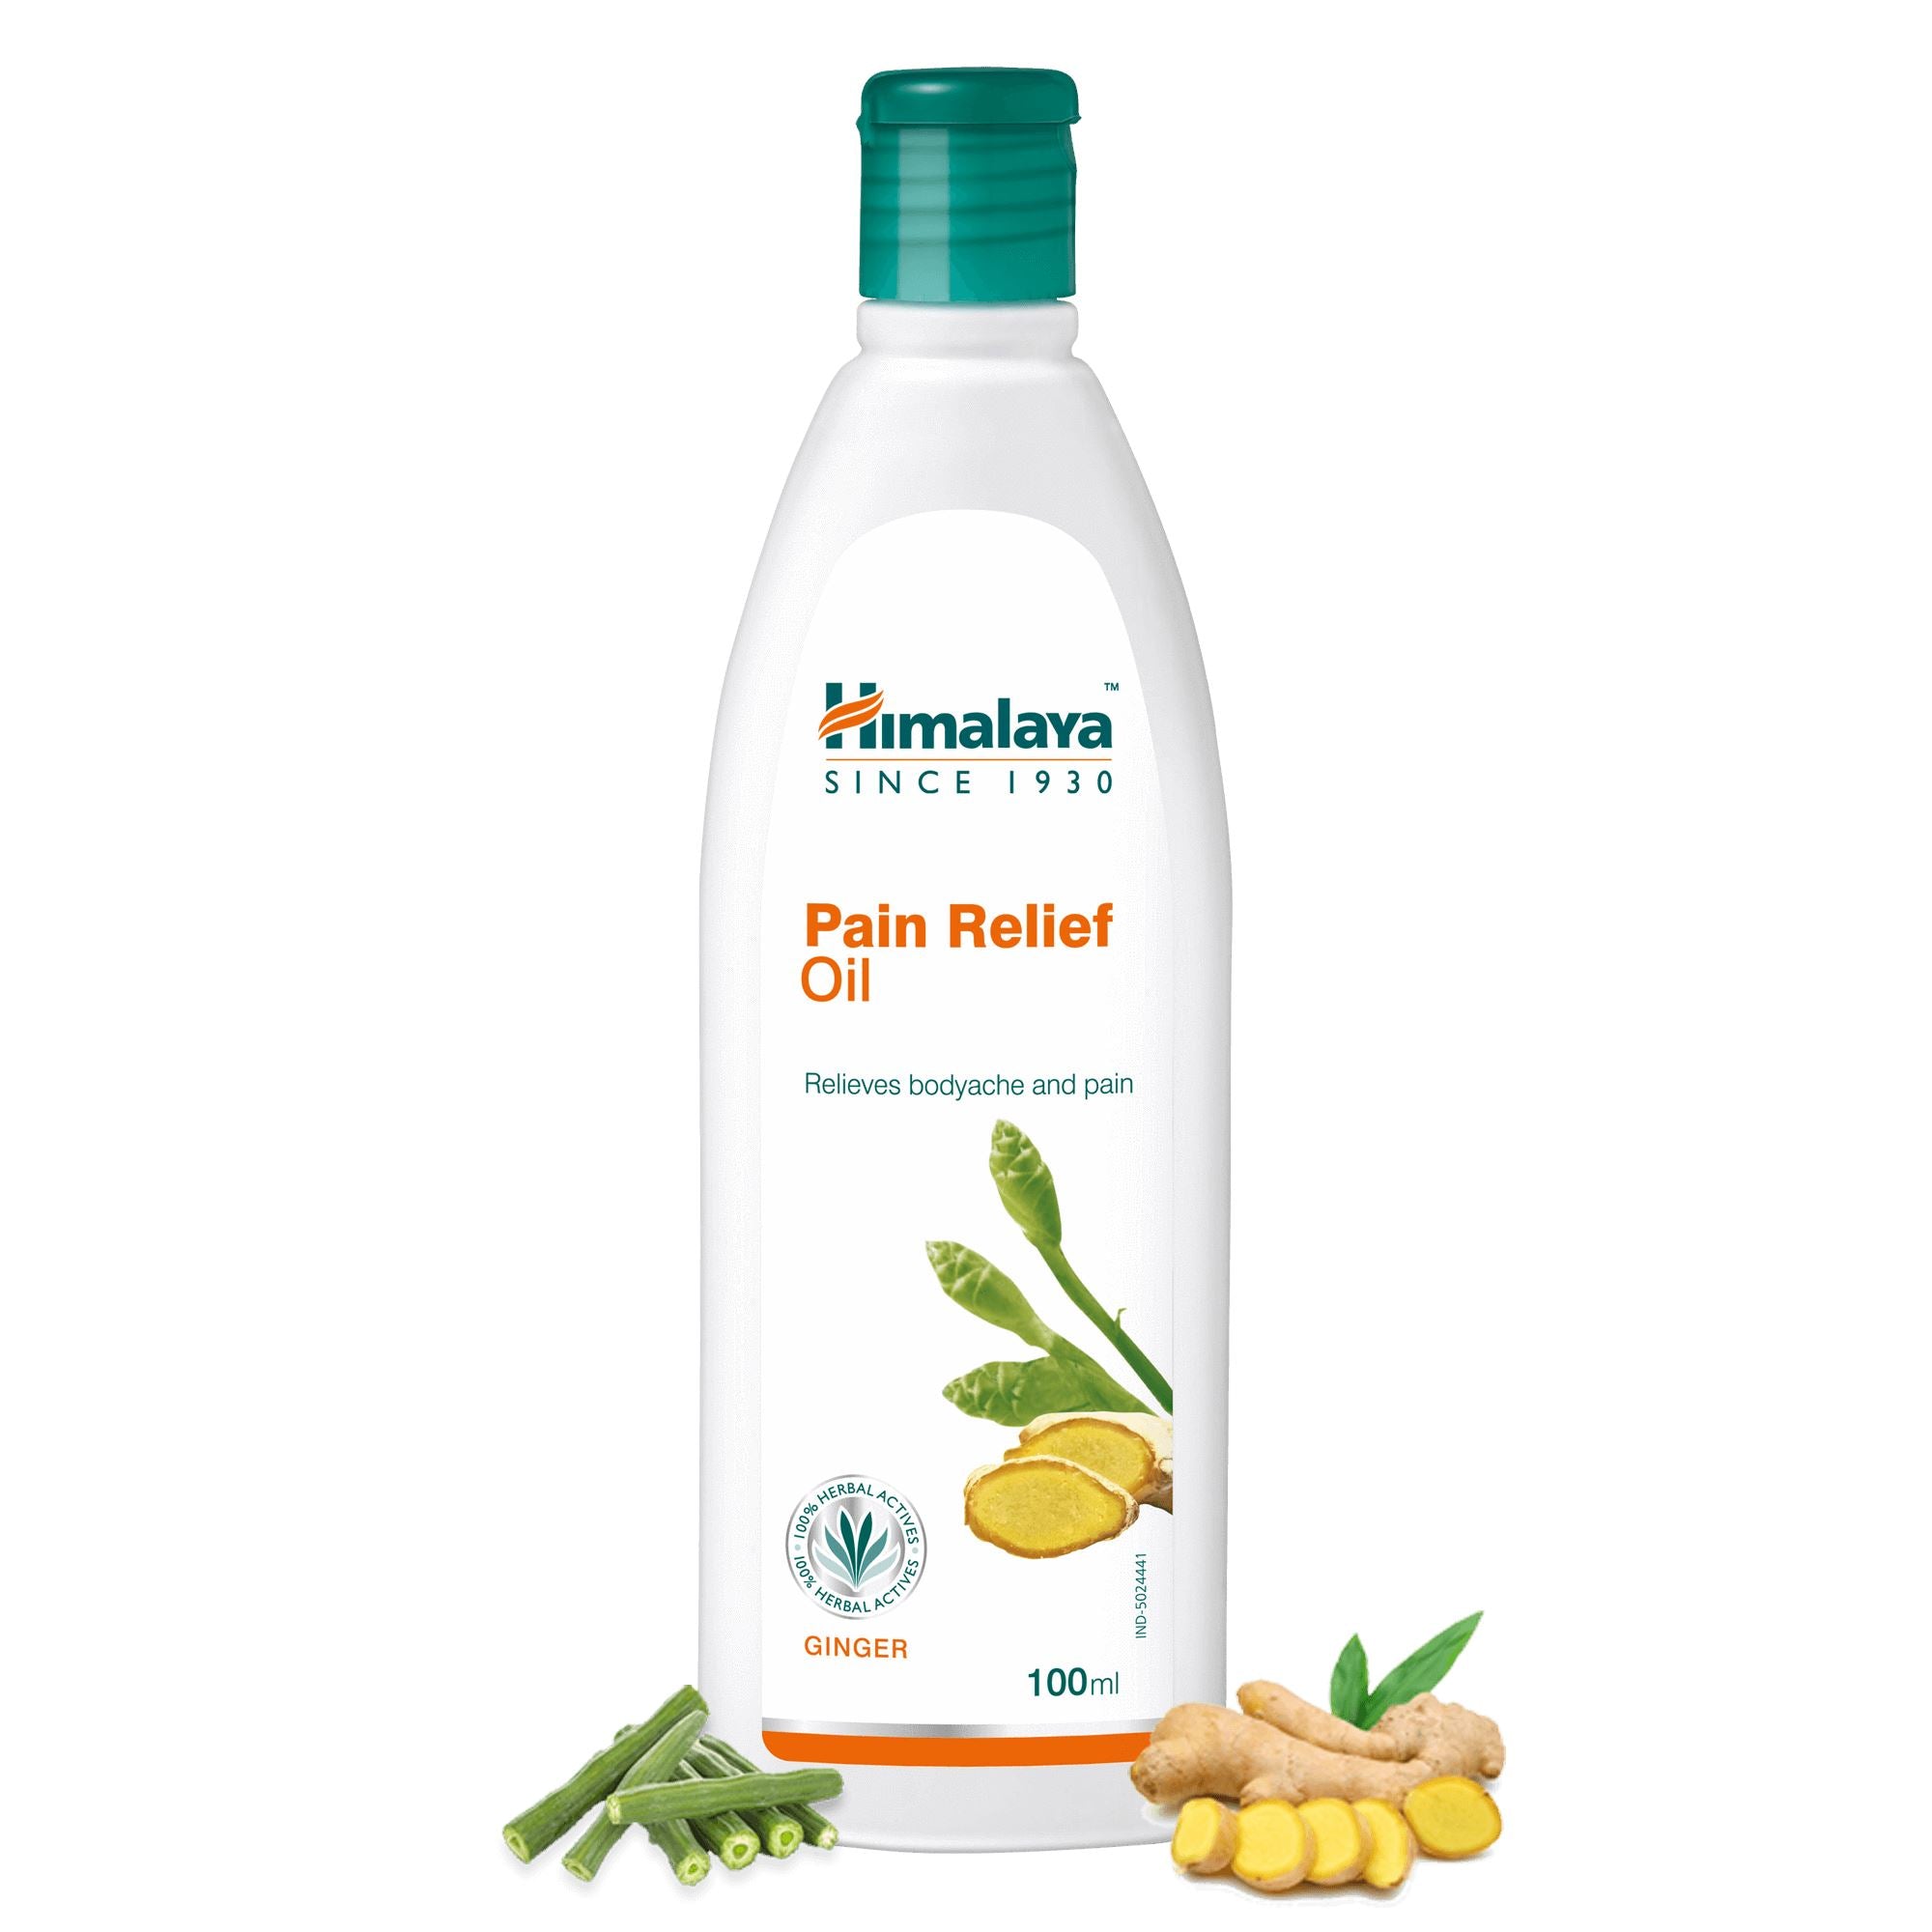 Himalaya Pain Relief Oil - Relieves bodyache and pain